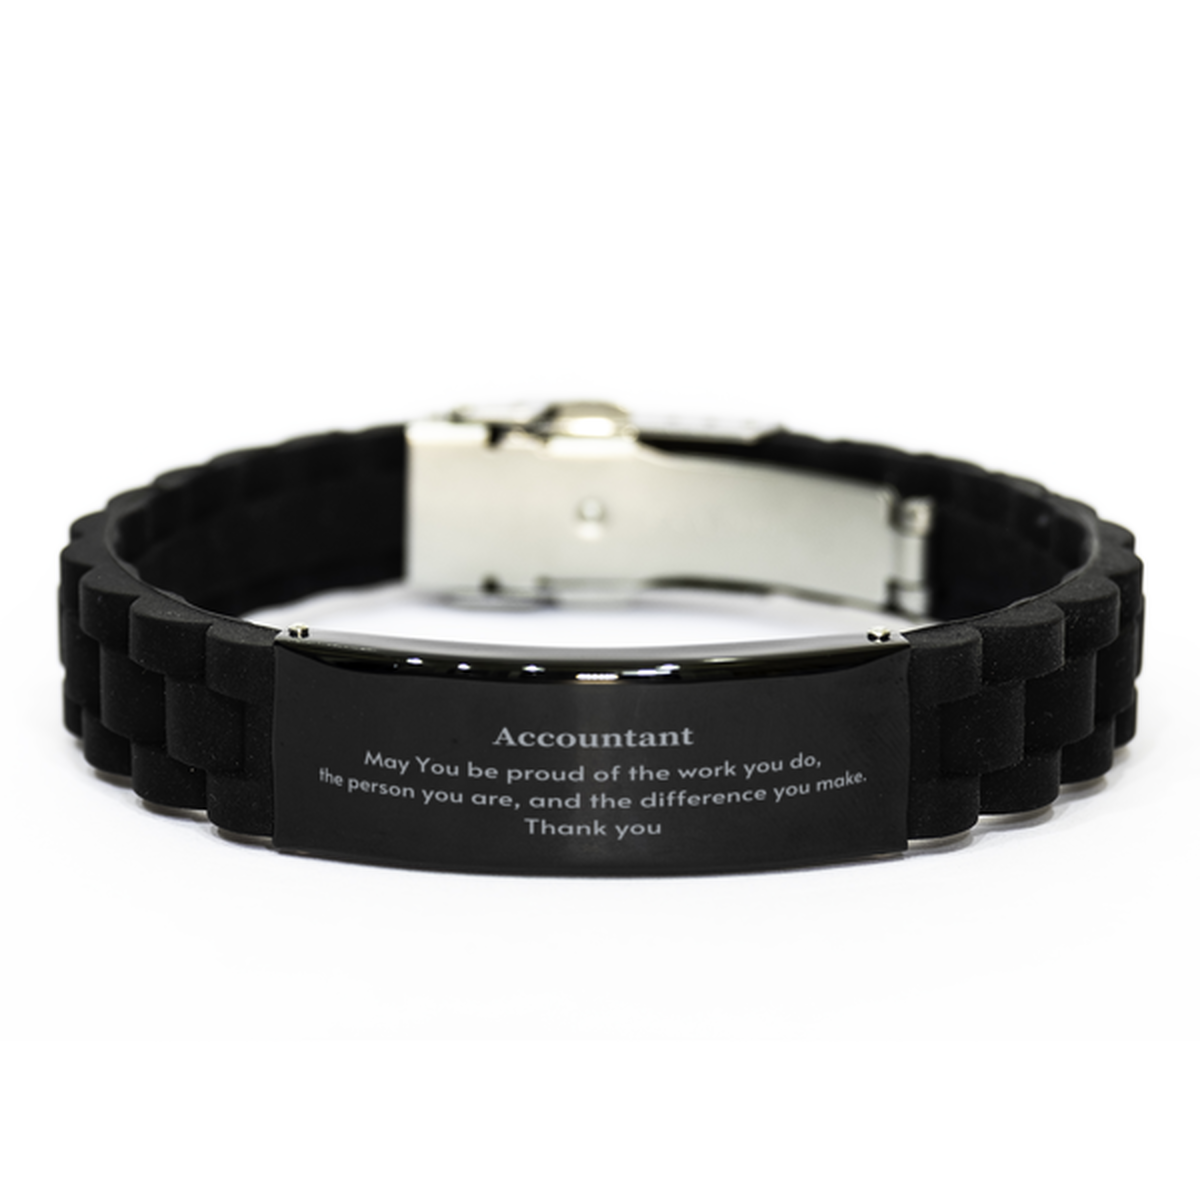 Heartwarming Black Glidelock Clasp Bracelet Retirement Coworkers Gifts for Accountant, Accountant May You be proud of the work you do, the person you are Gifts for Boss Men Women Friends